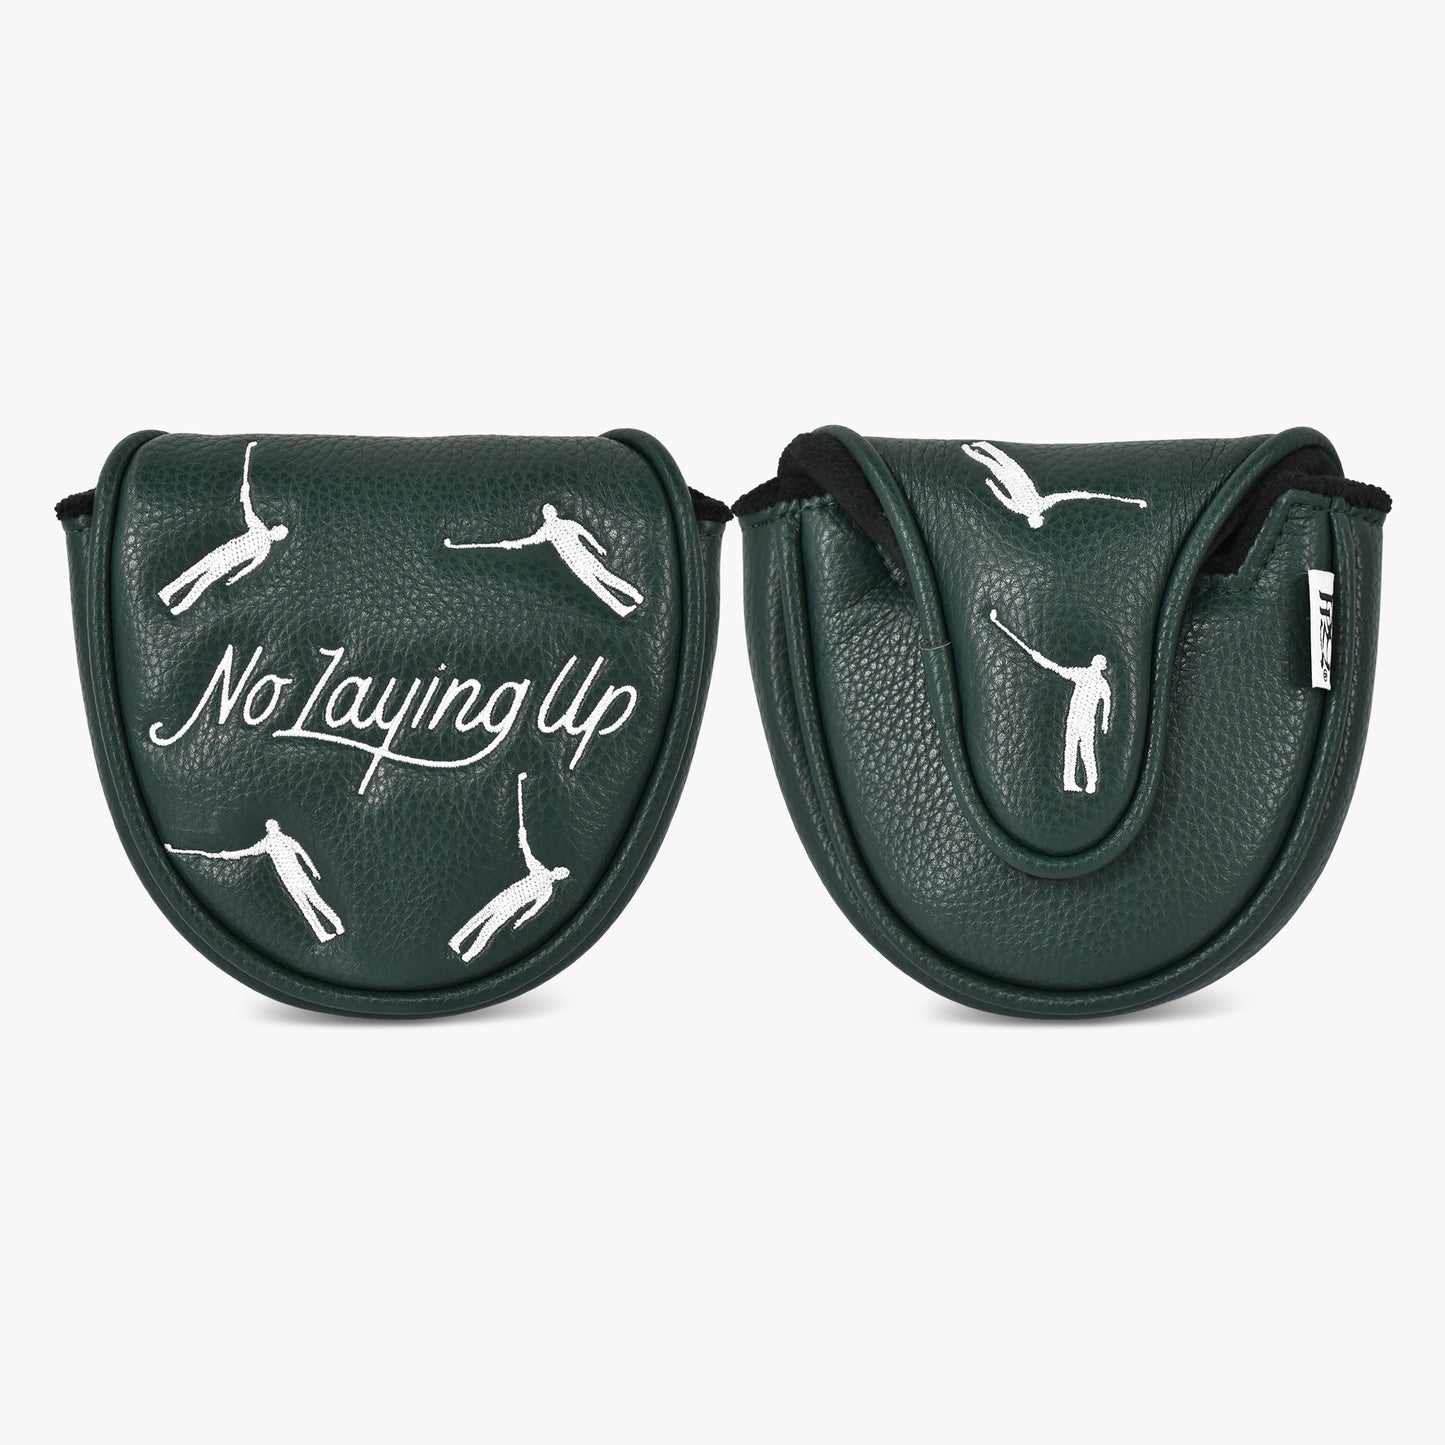 No Laying Up Mallet Putter Cover (round and square options) | Hunter Green w/ White